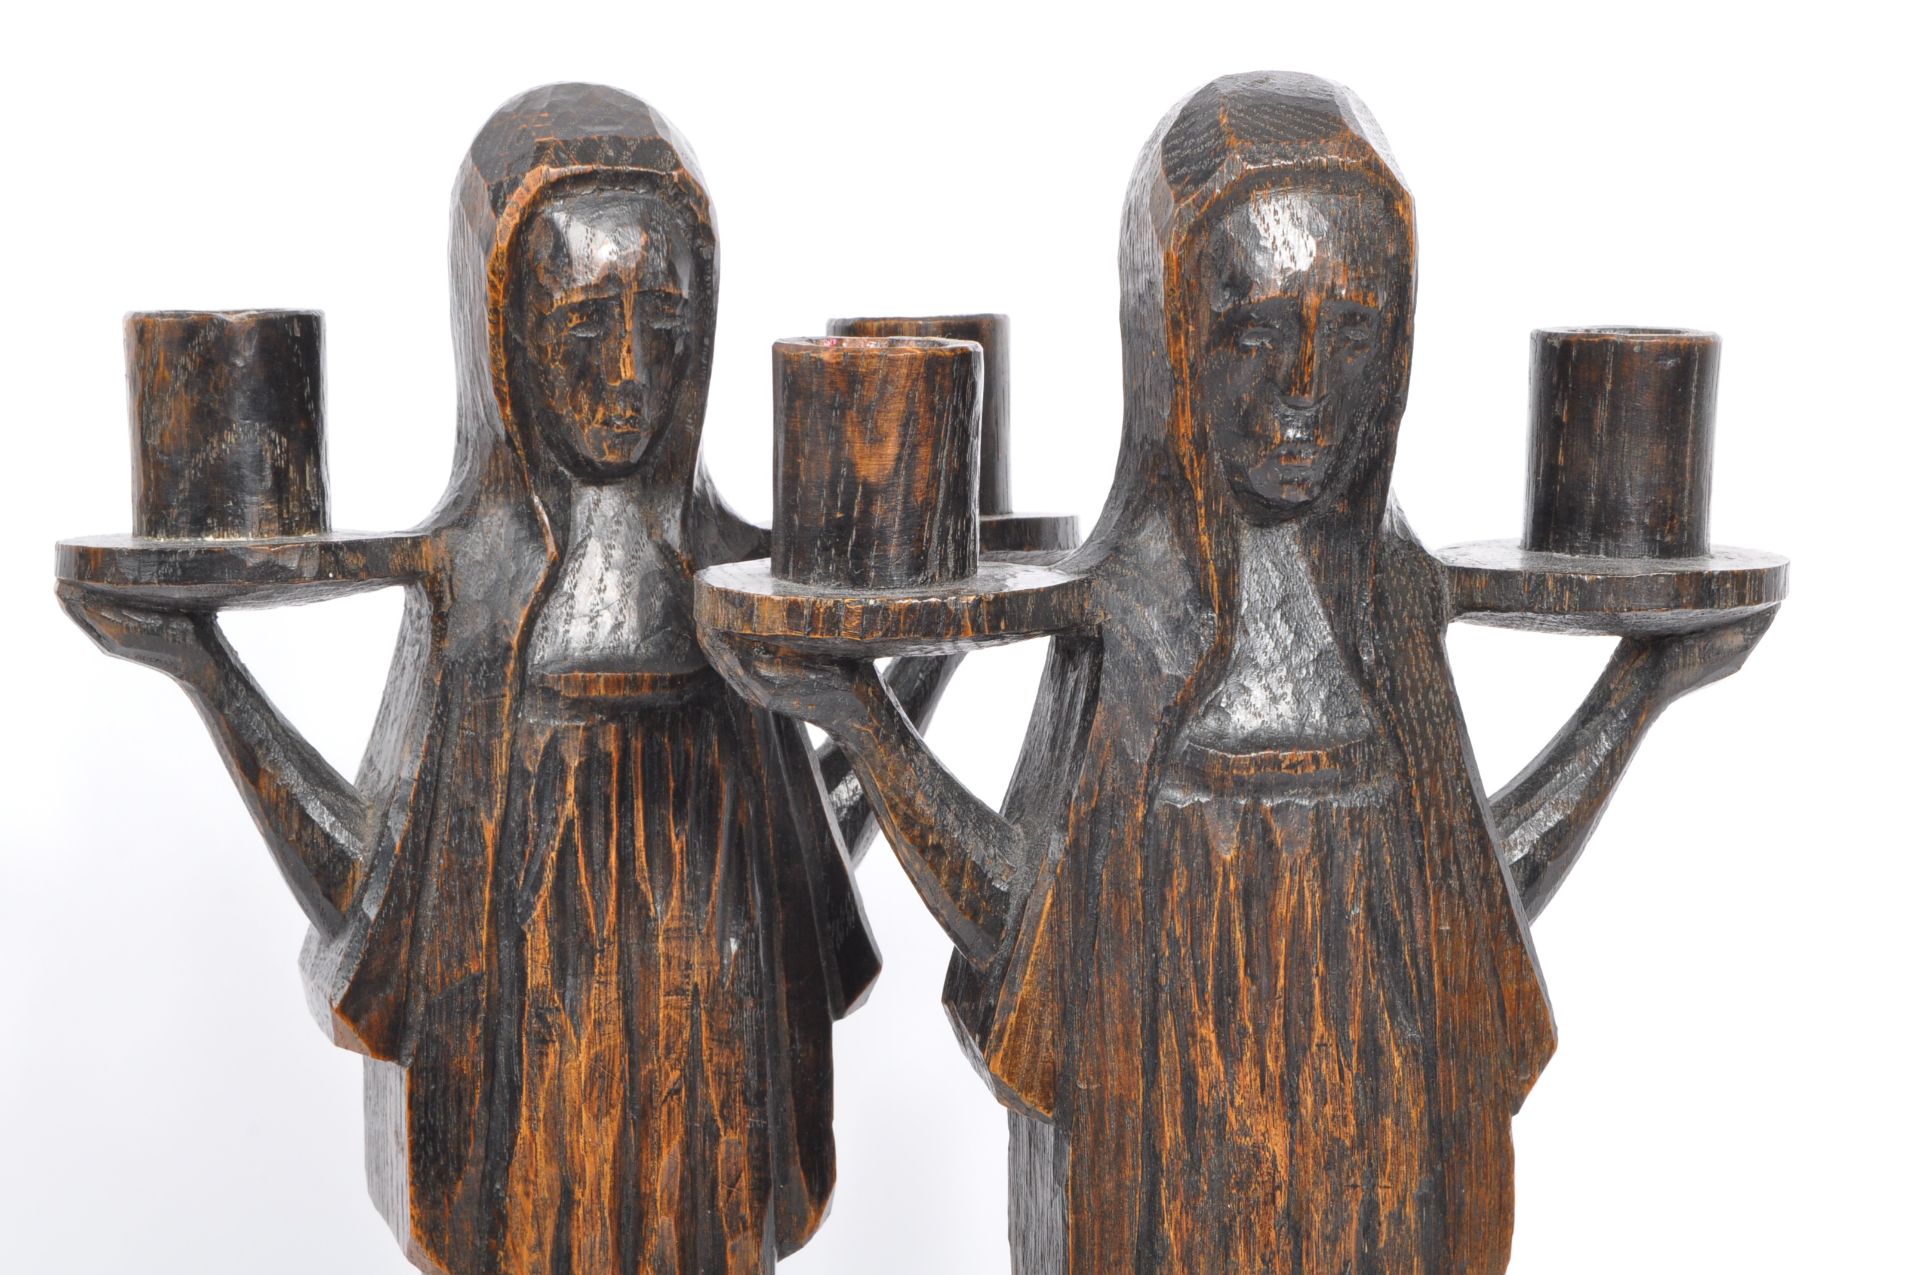 PAIR OF 20TH CENTURY HAND CARVED WOODEN CANDLESTICKS - Image 6 of 6